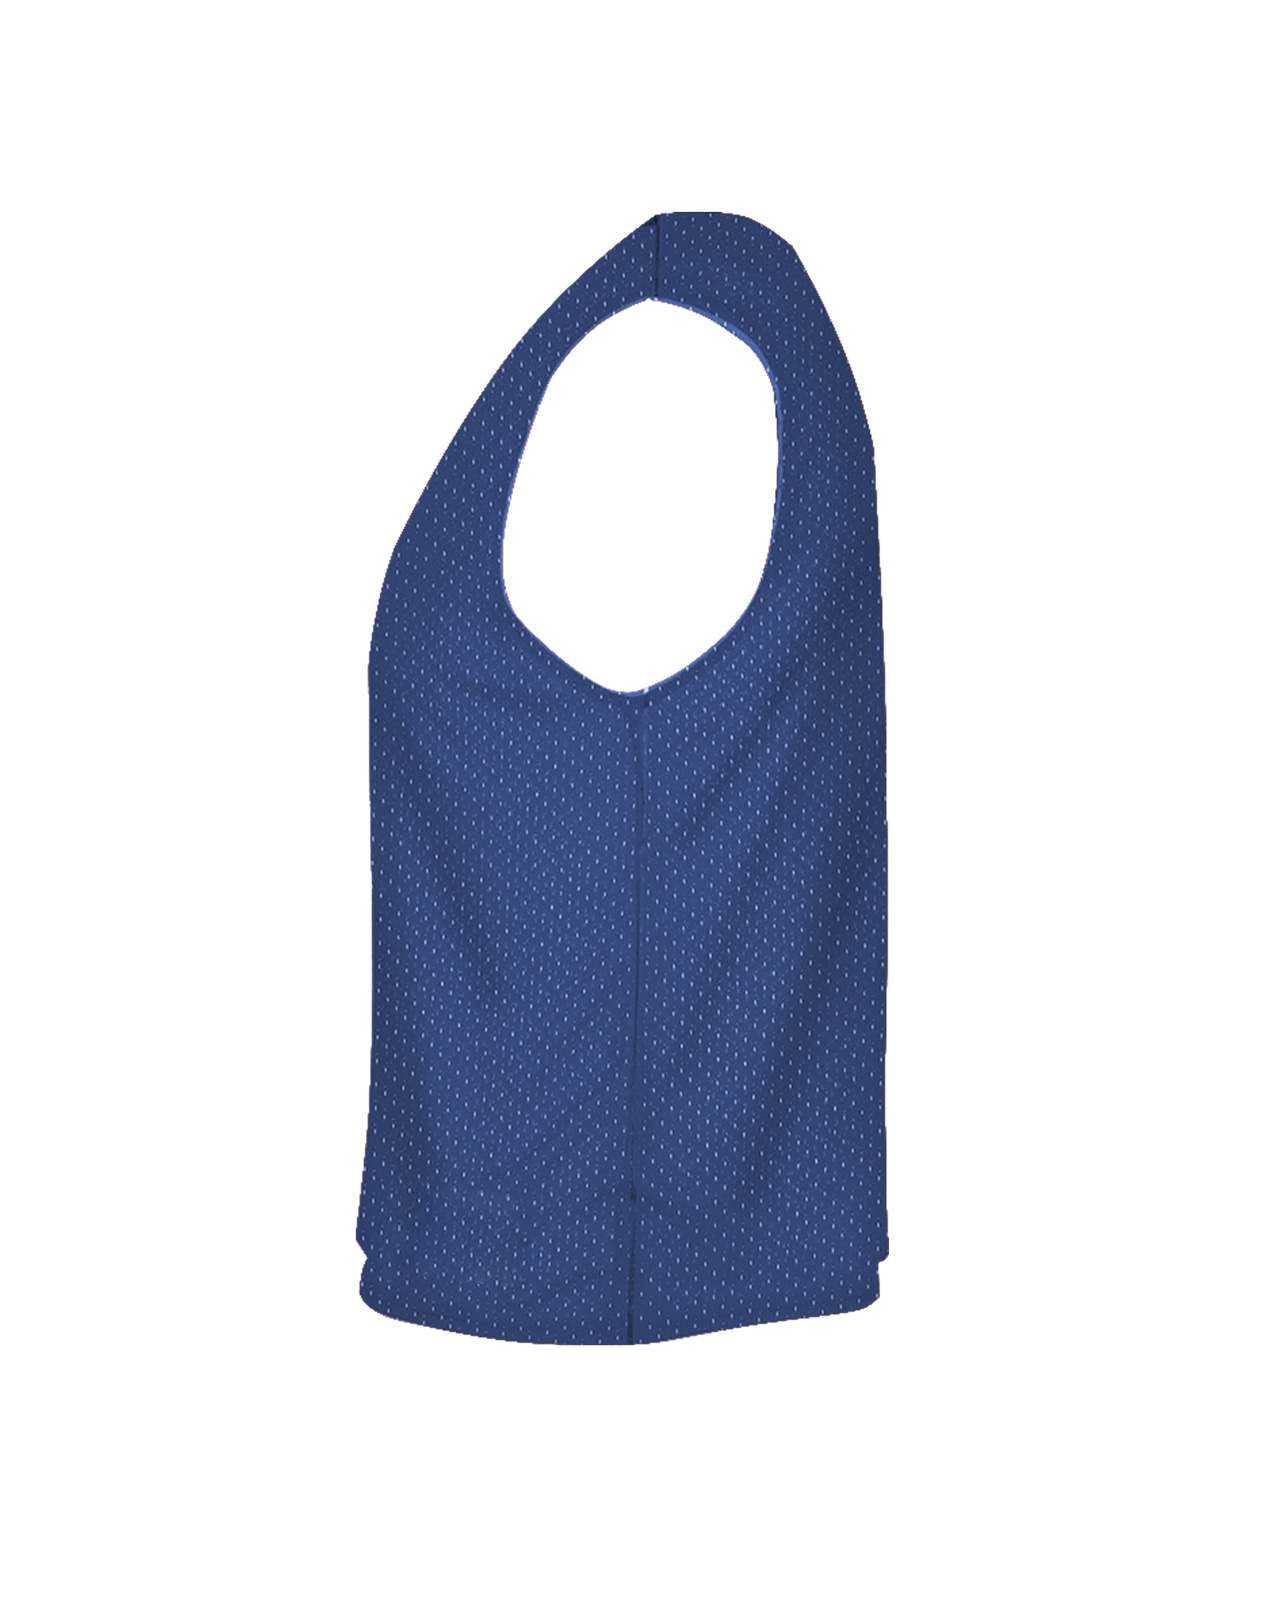 C2 Sport 5260 Mesh Reversible Youth Pinnie - Royal White - HIT a Double - 1